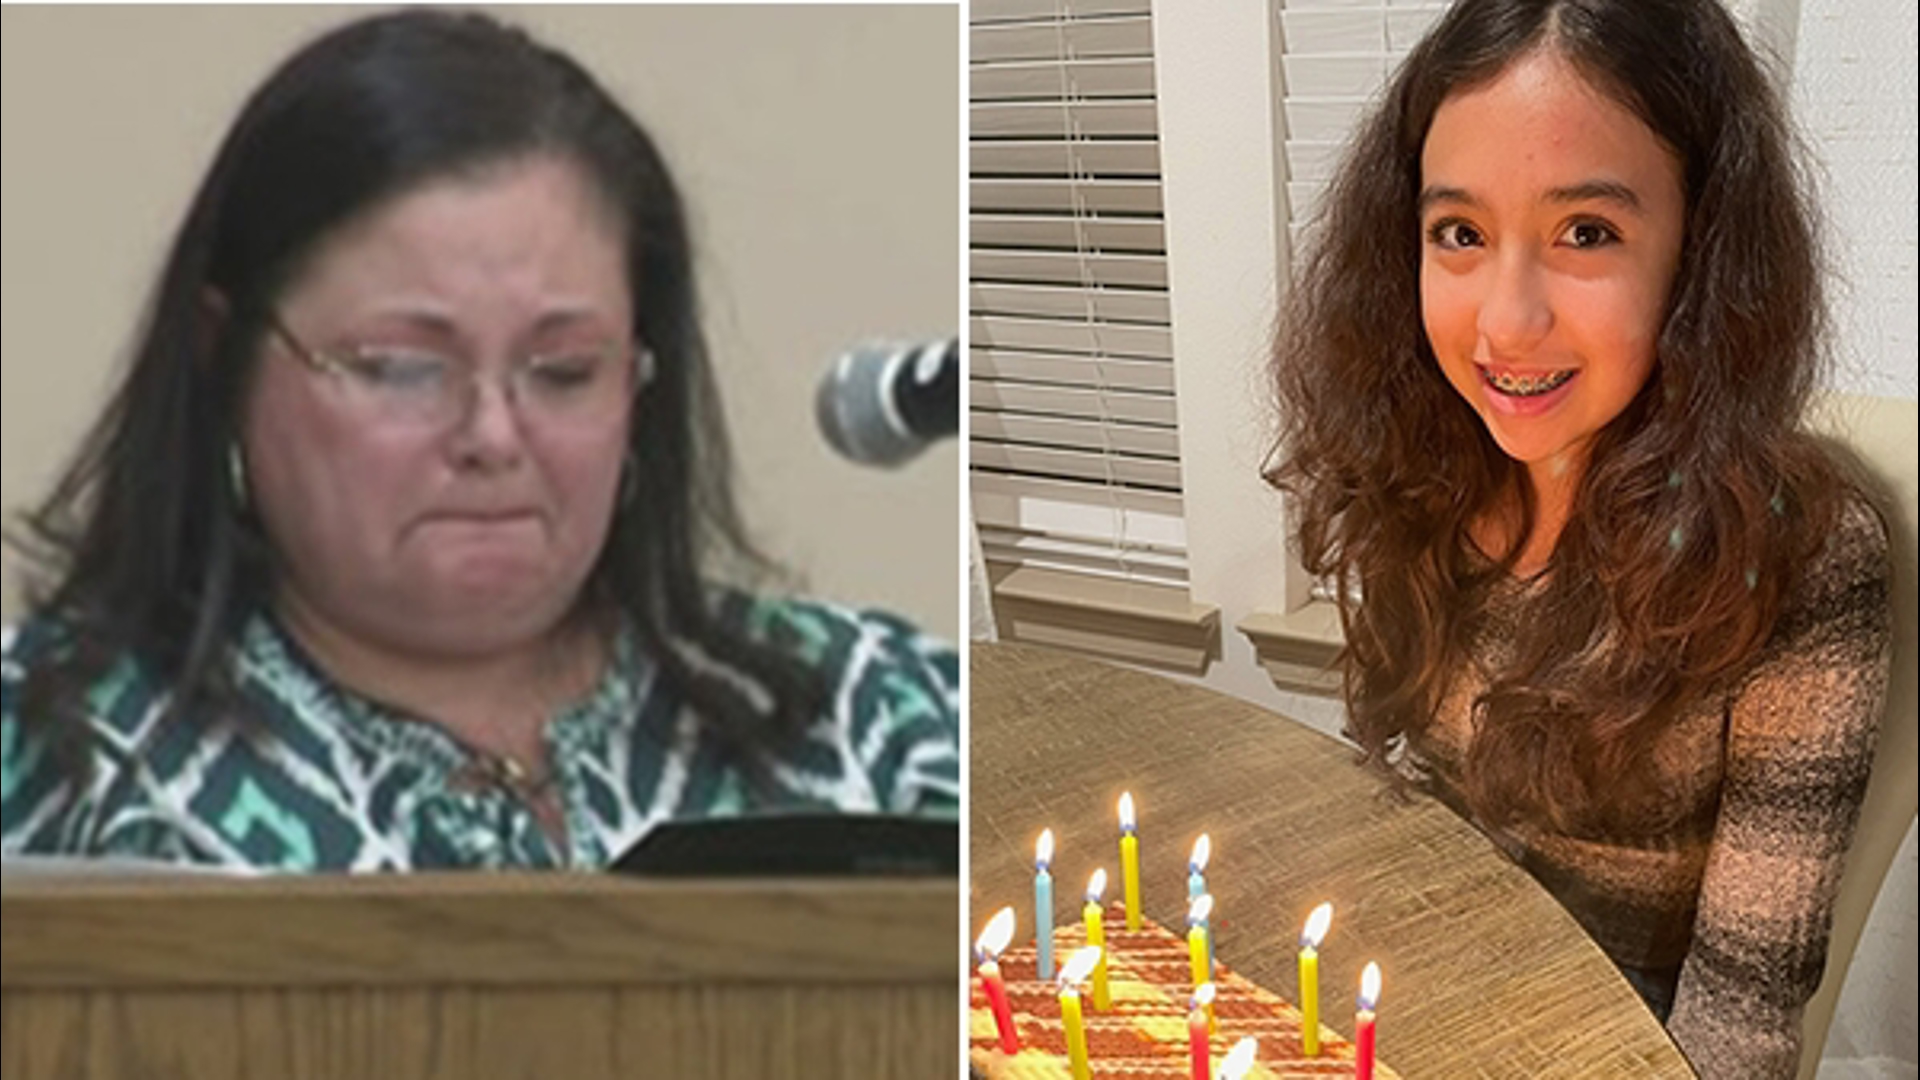 Jocelyn Nungaray's great aunt spoke at the 12-year-old girl's funeral, sharing fond memories.